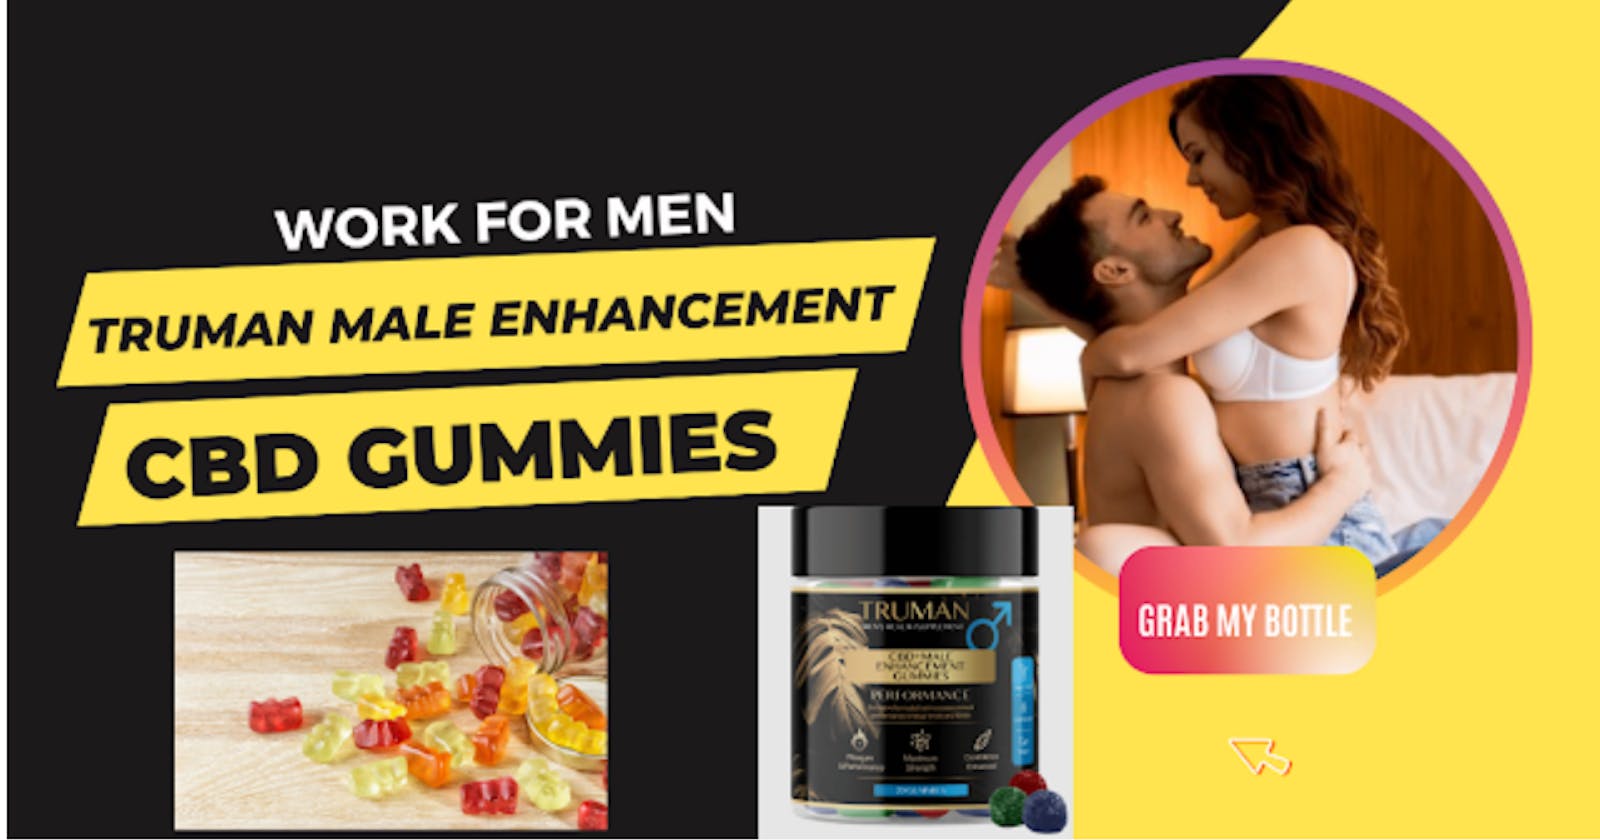 Super Gorilla Male Enhancement - Effective Product Good For You, Where To Buy!